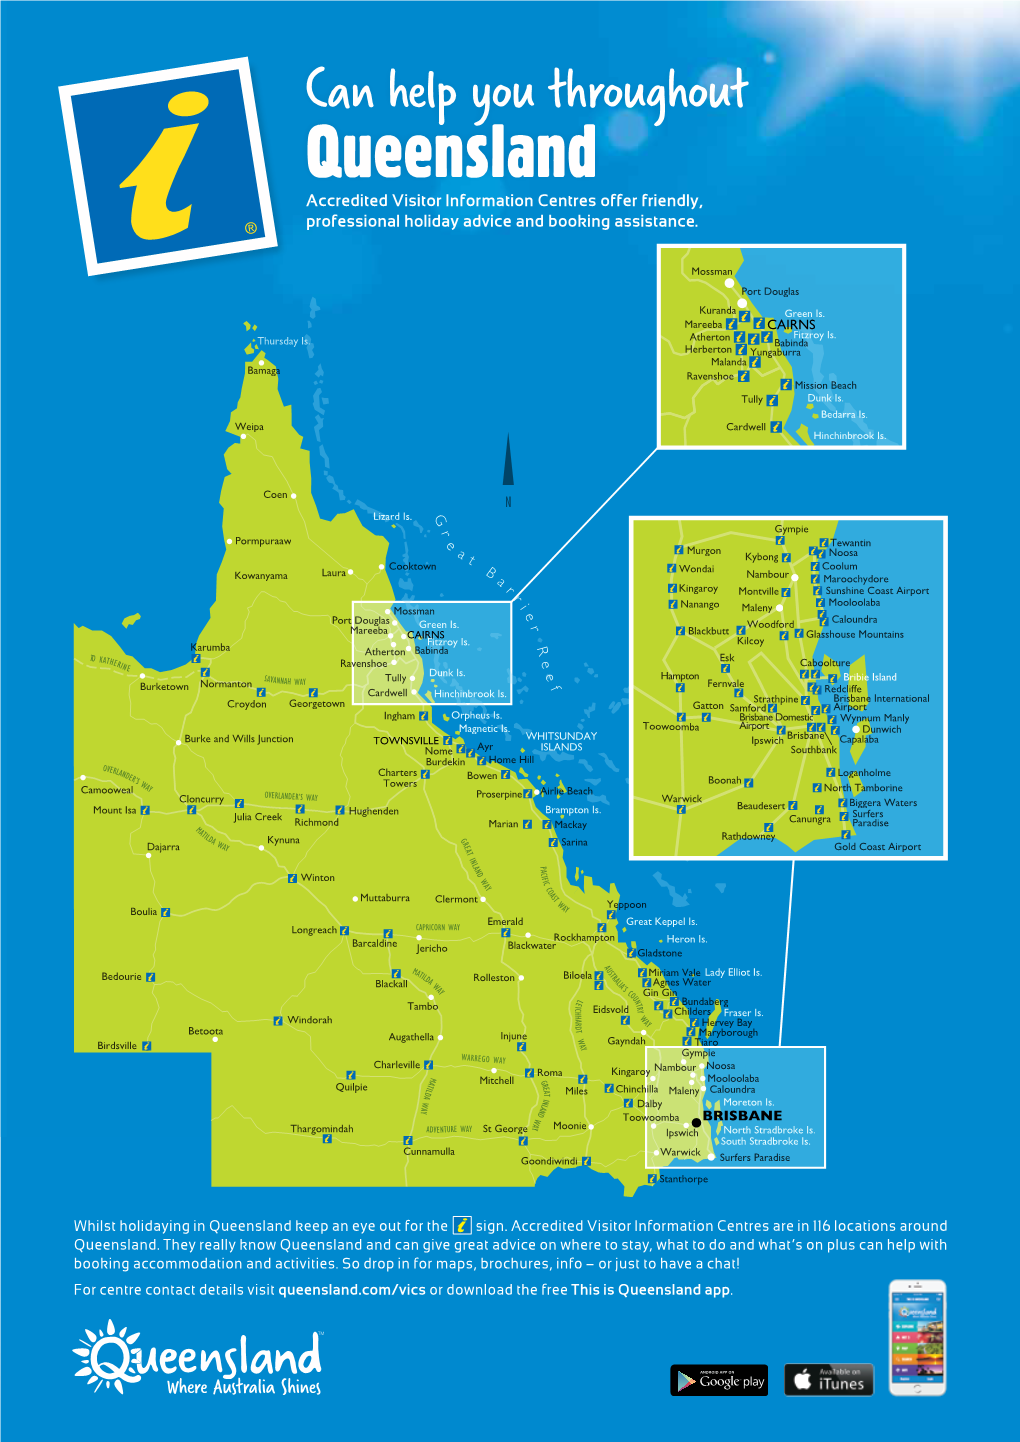 Can Help You Throughout Queensland Accredited Visitor Information Centres Offer Friendly, Professional Holiday Advice and Booking Assistance